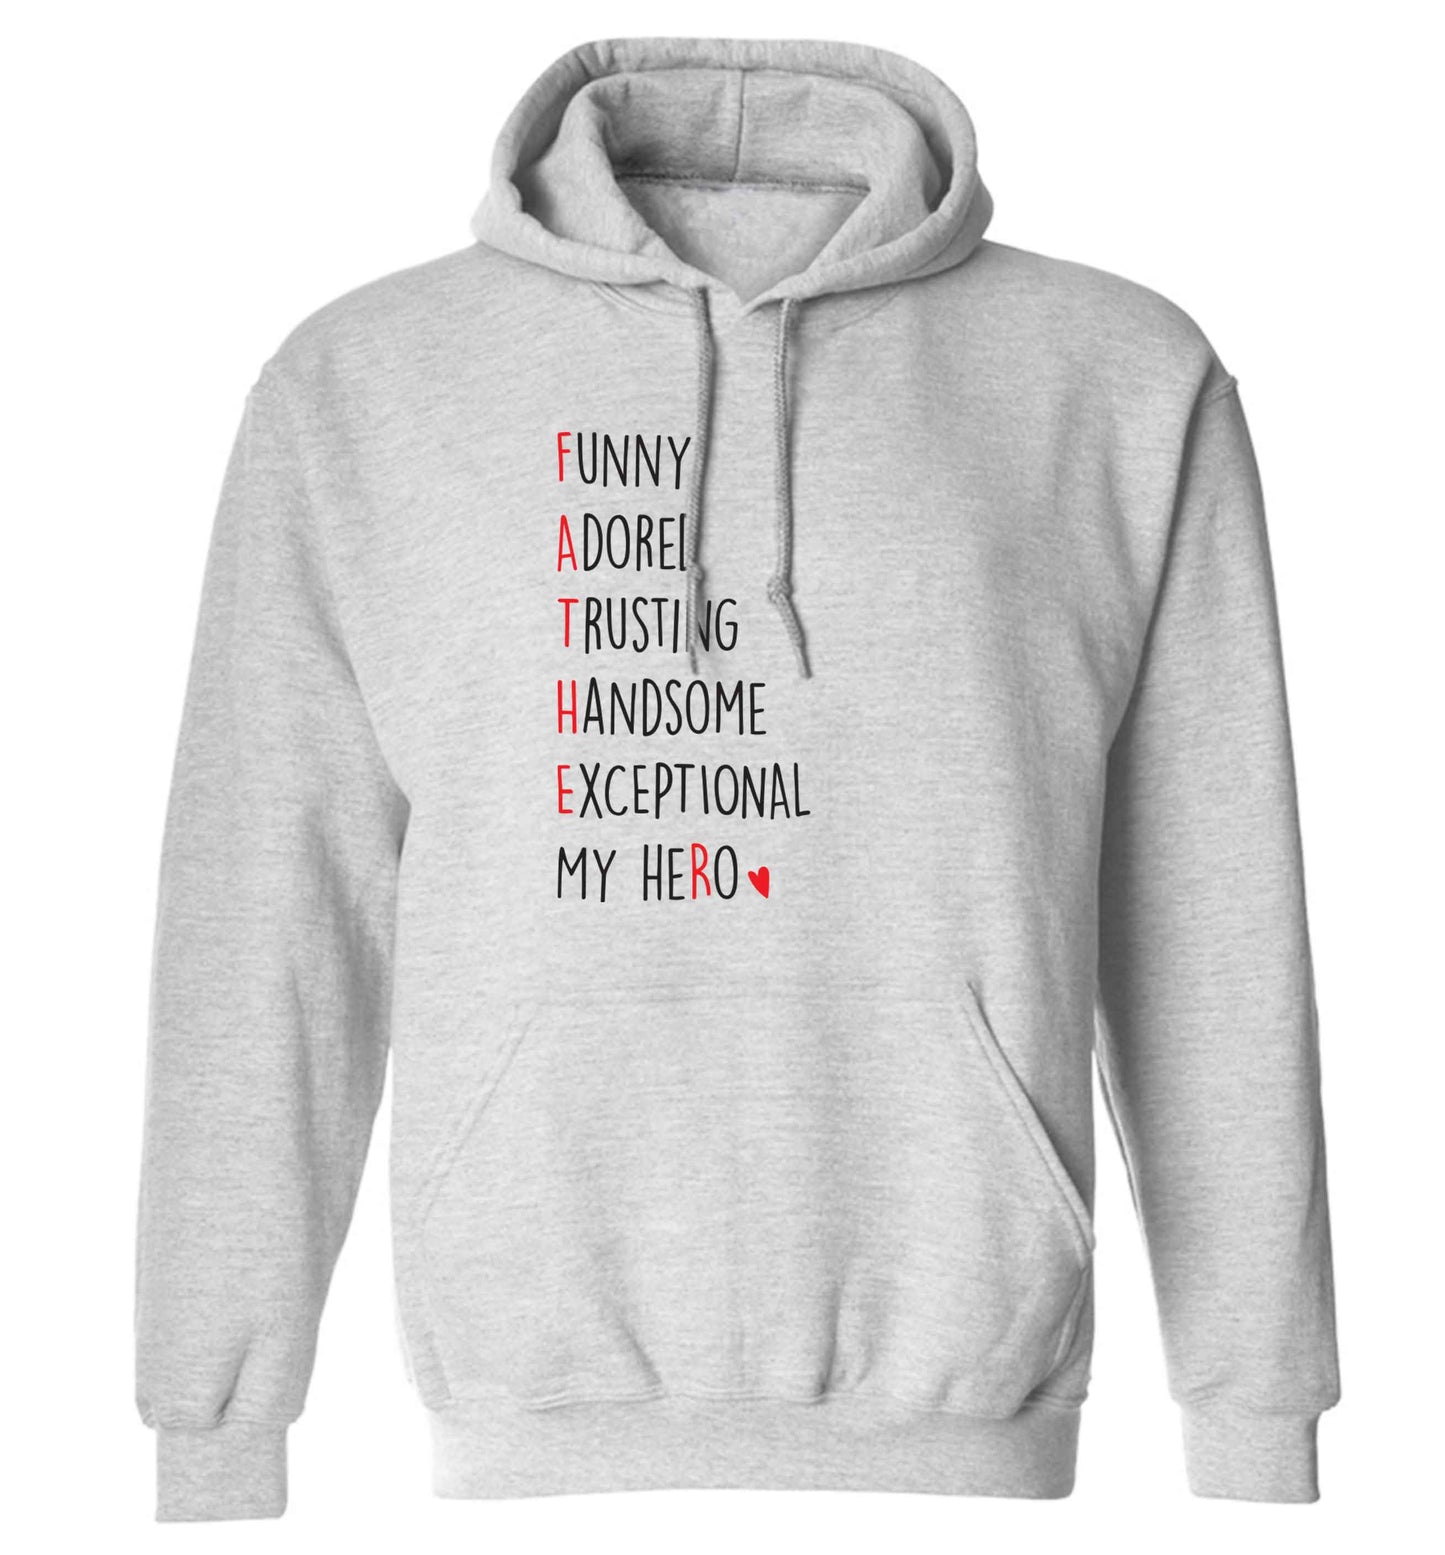 Father meaning hero acrostic poem adults unisex grey hoodie 2XL